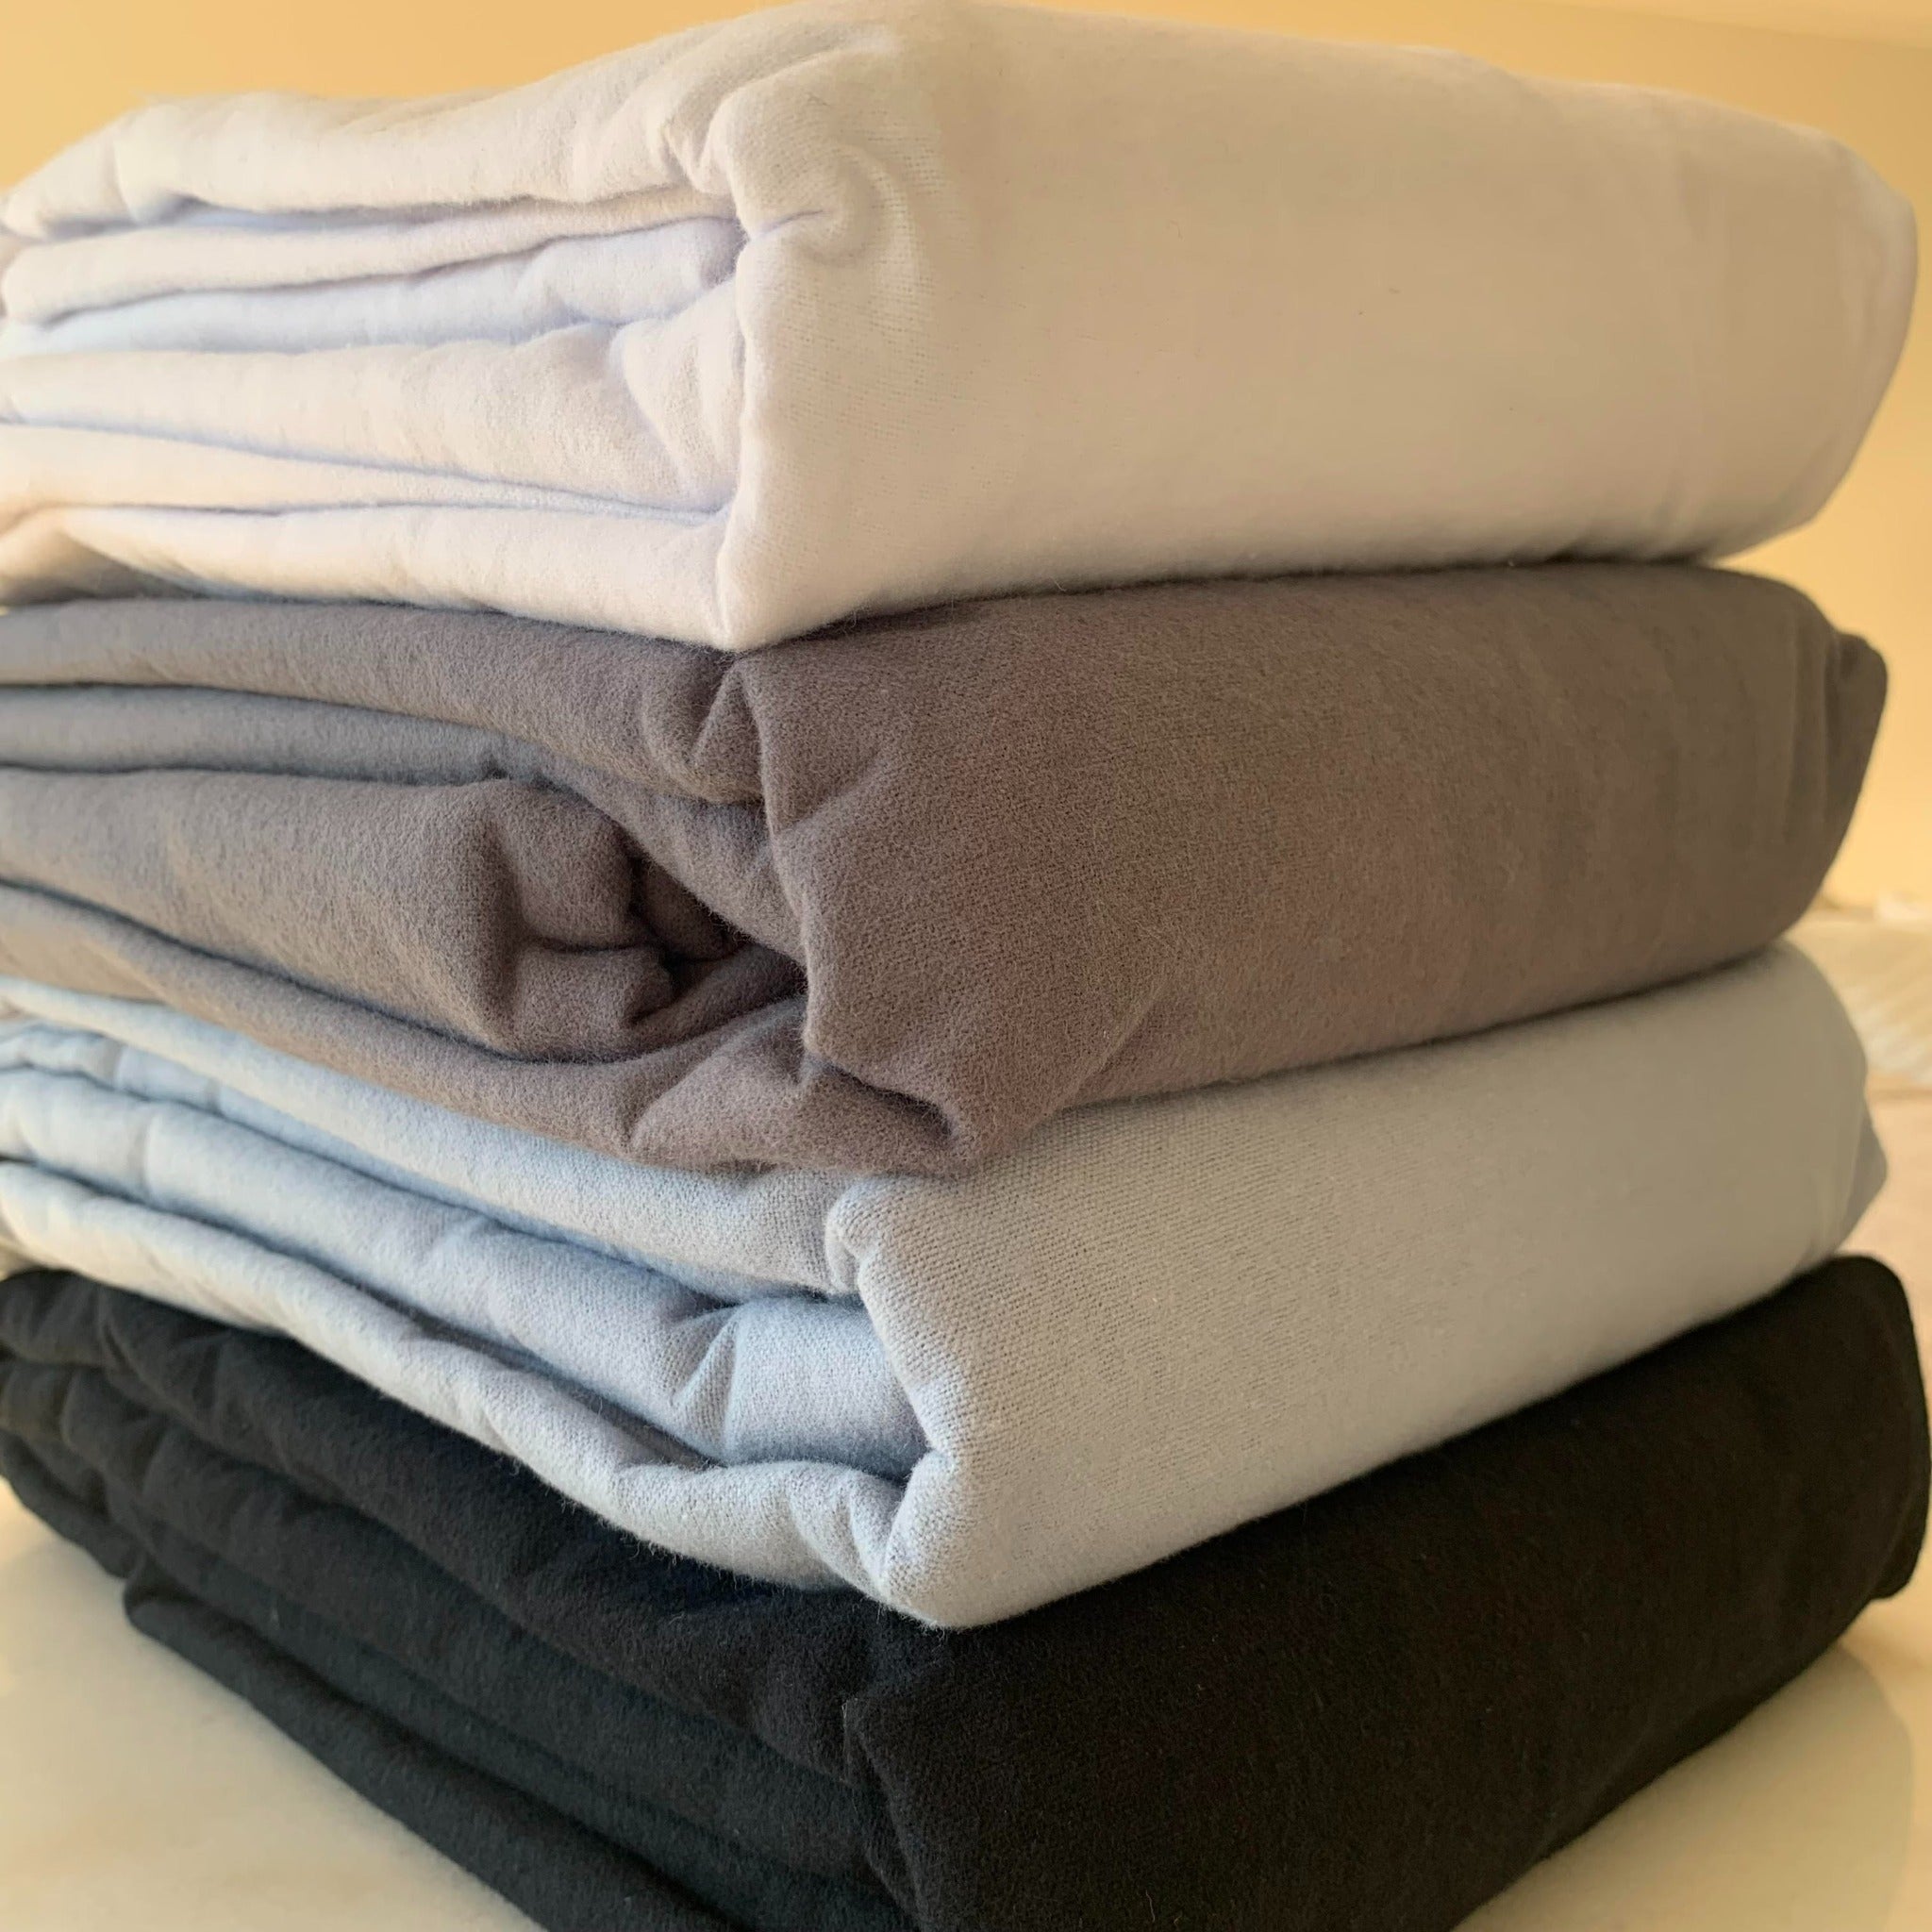 Massage Table Flannel Fitted Sheet Set 100% Cotton